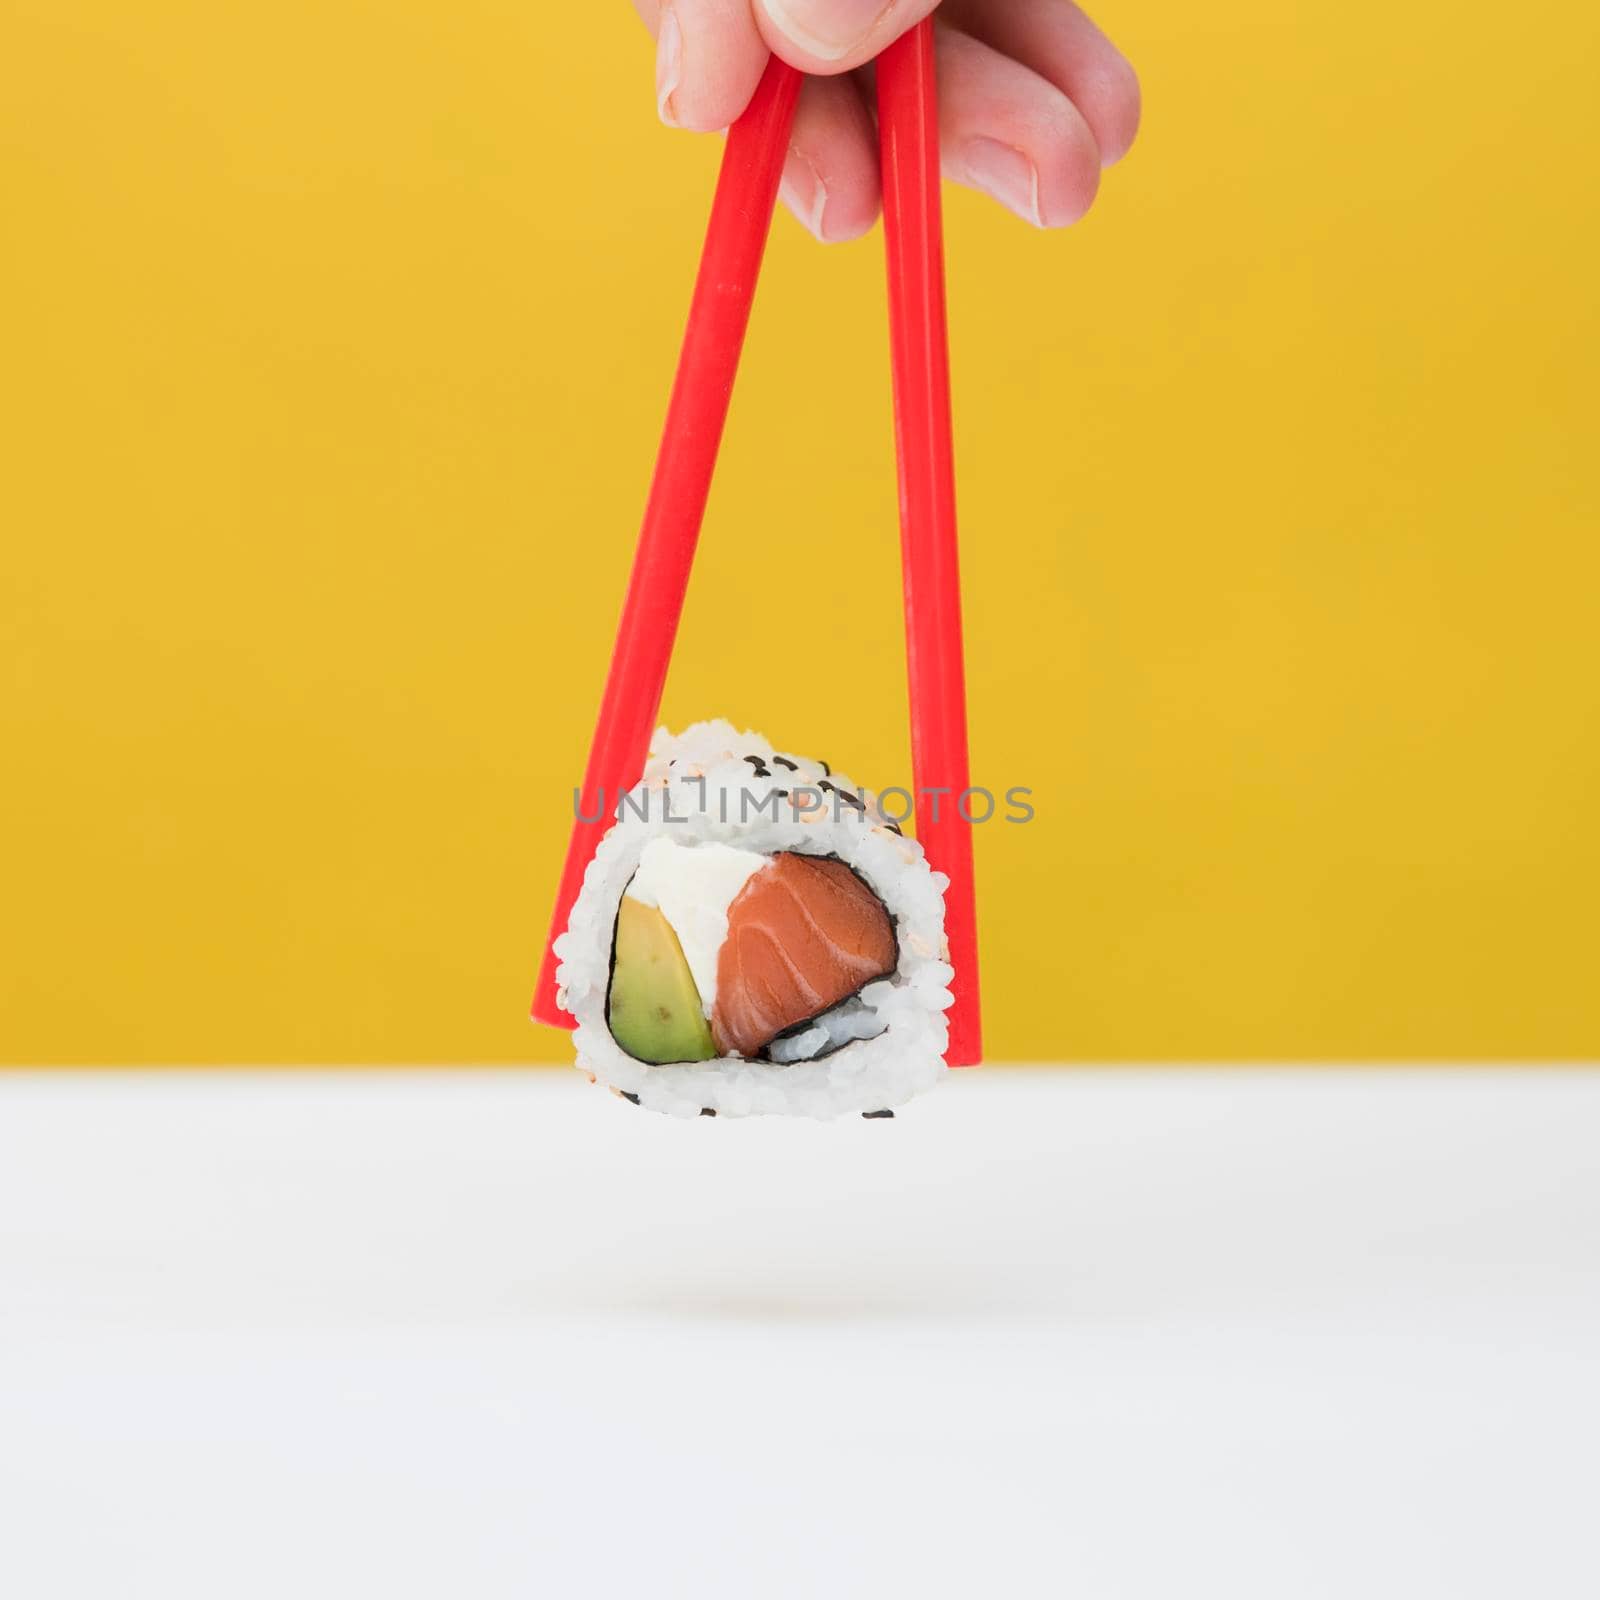 close up person s hand holding sushi with red chopsticks against yellow backdrop by Zahard